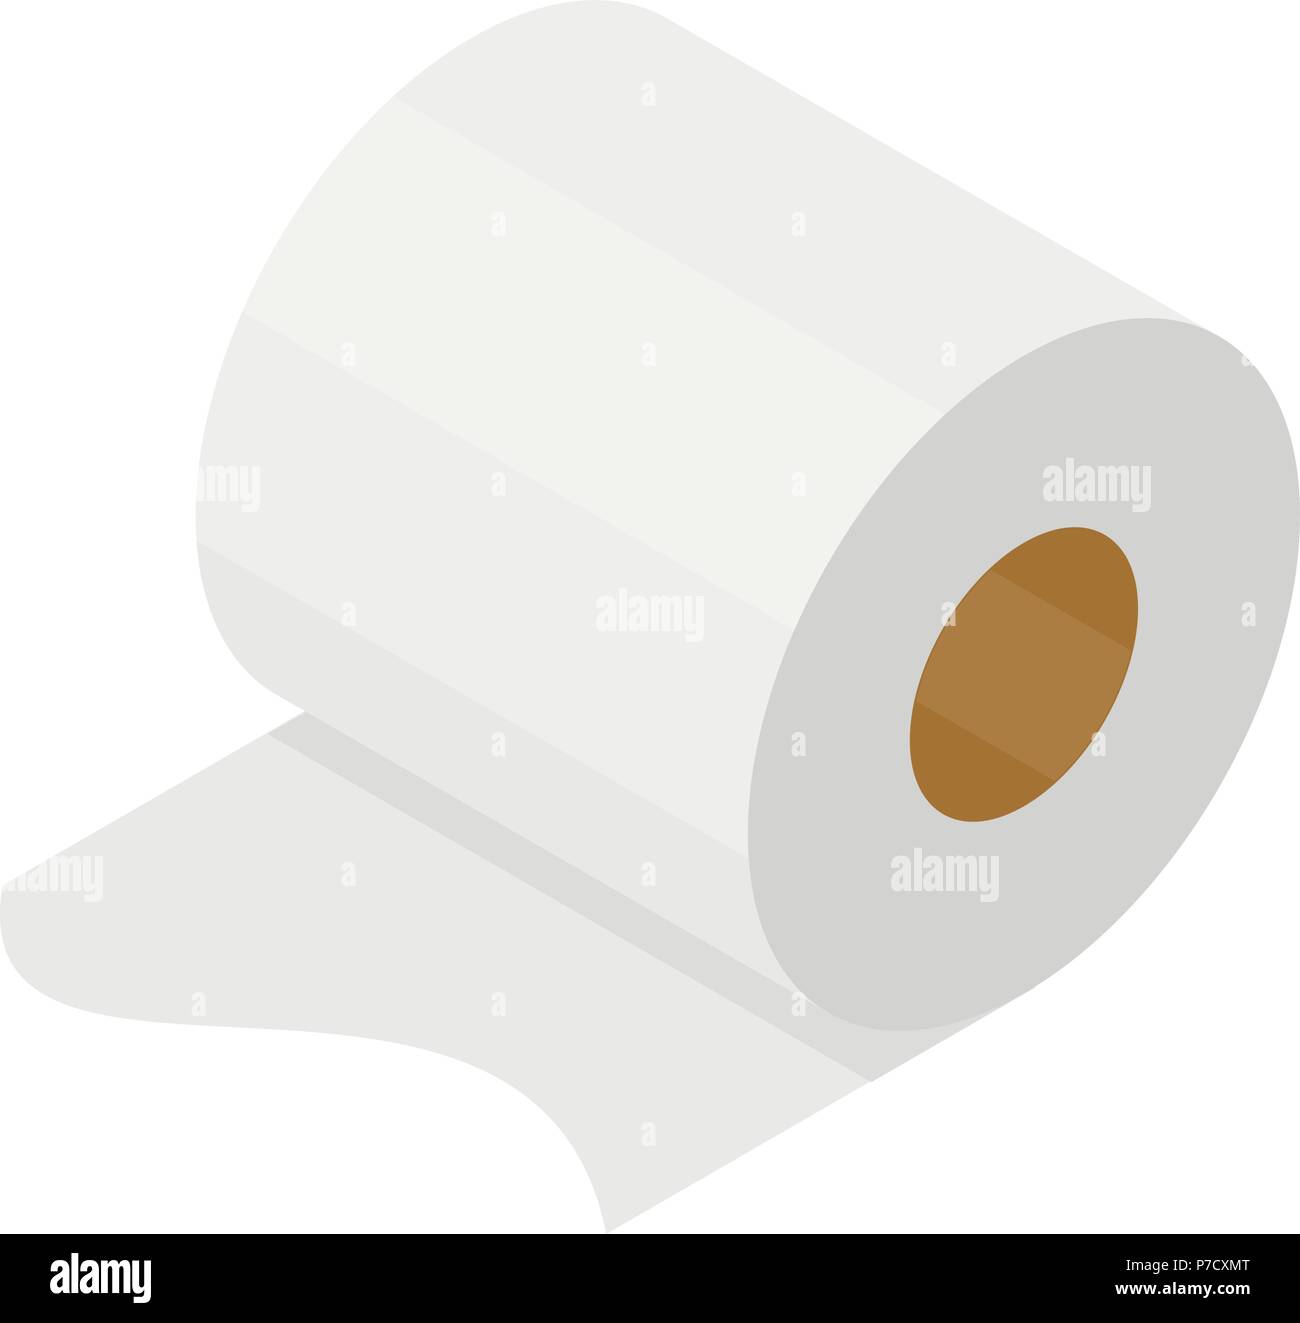 3d isometric vector illustration of roll of toilet paper Stock Vector